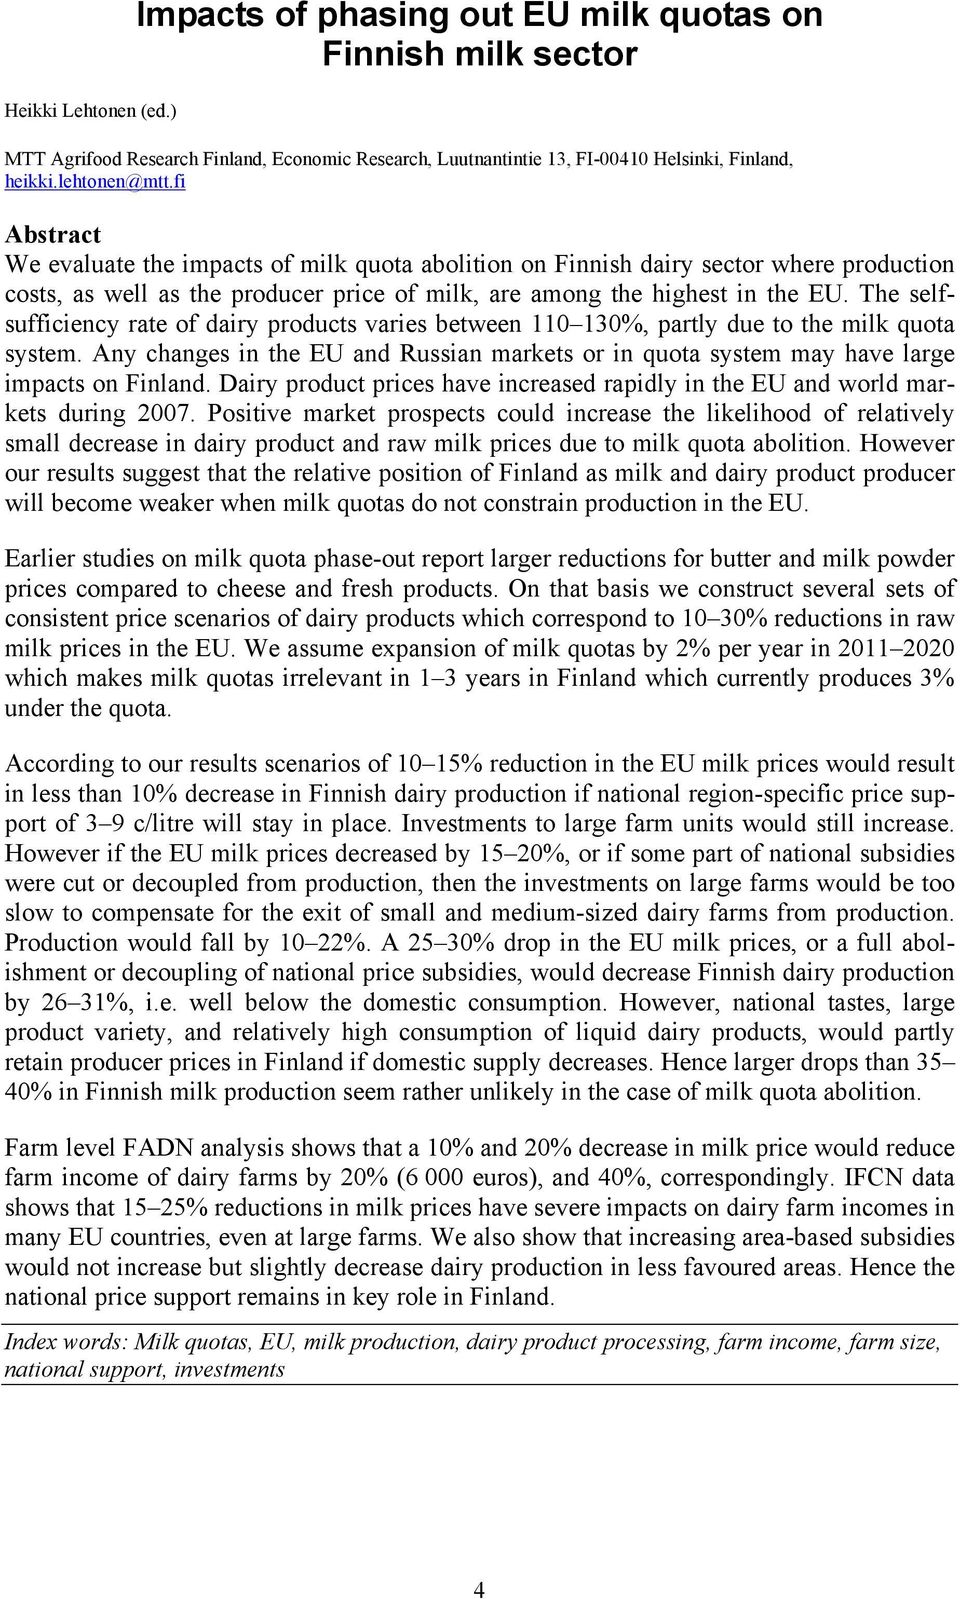 The selfsufficiency rate of dairy products varies between 110 130%, partly due to the milk quota system. Any changes in the EU and Russian markets or in quota system may have large impacts on Finland.